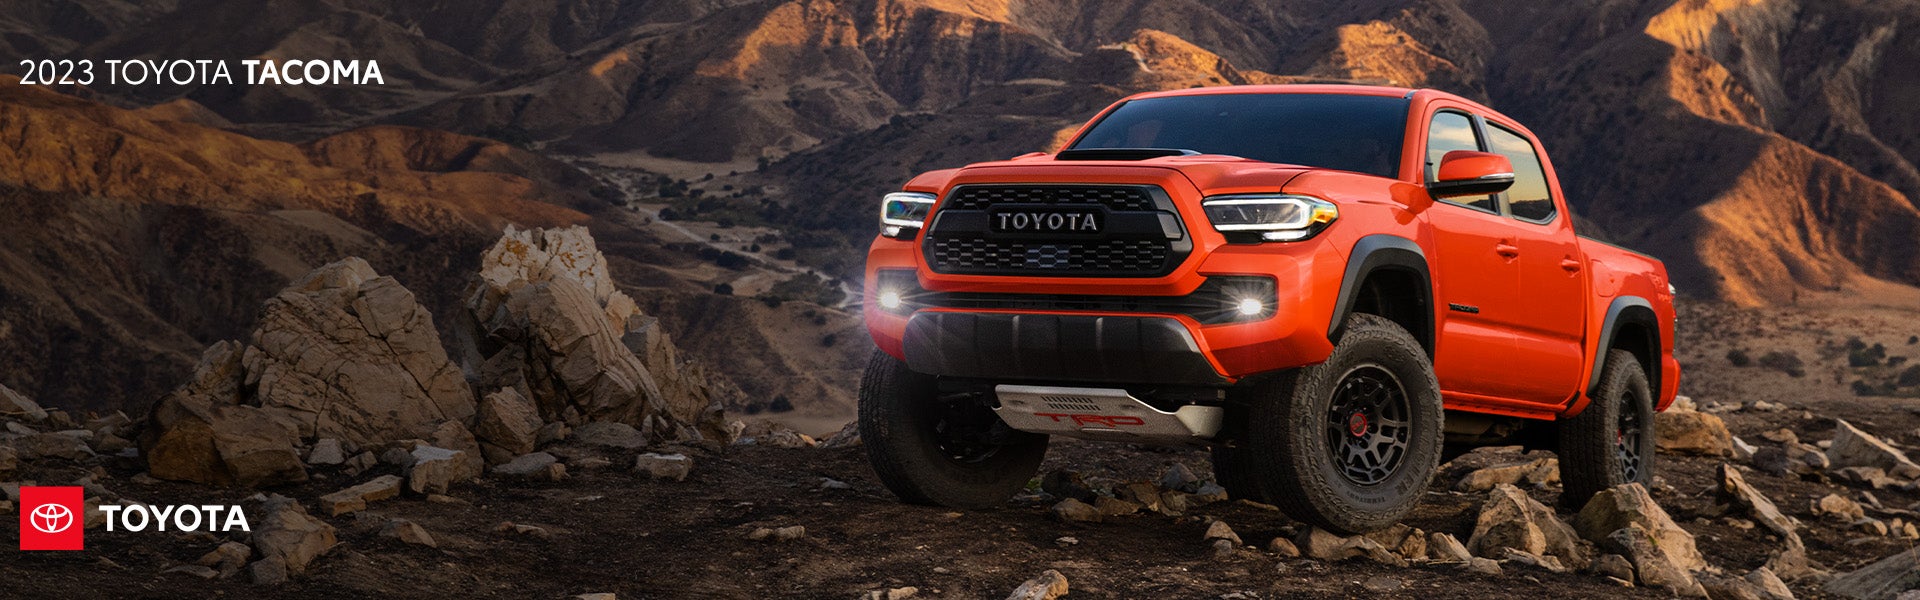 2023 Toyota Tacoma at Toyota of Lake City in Seattle, WA